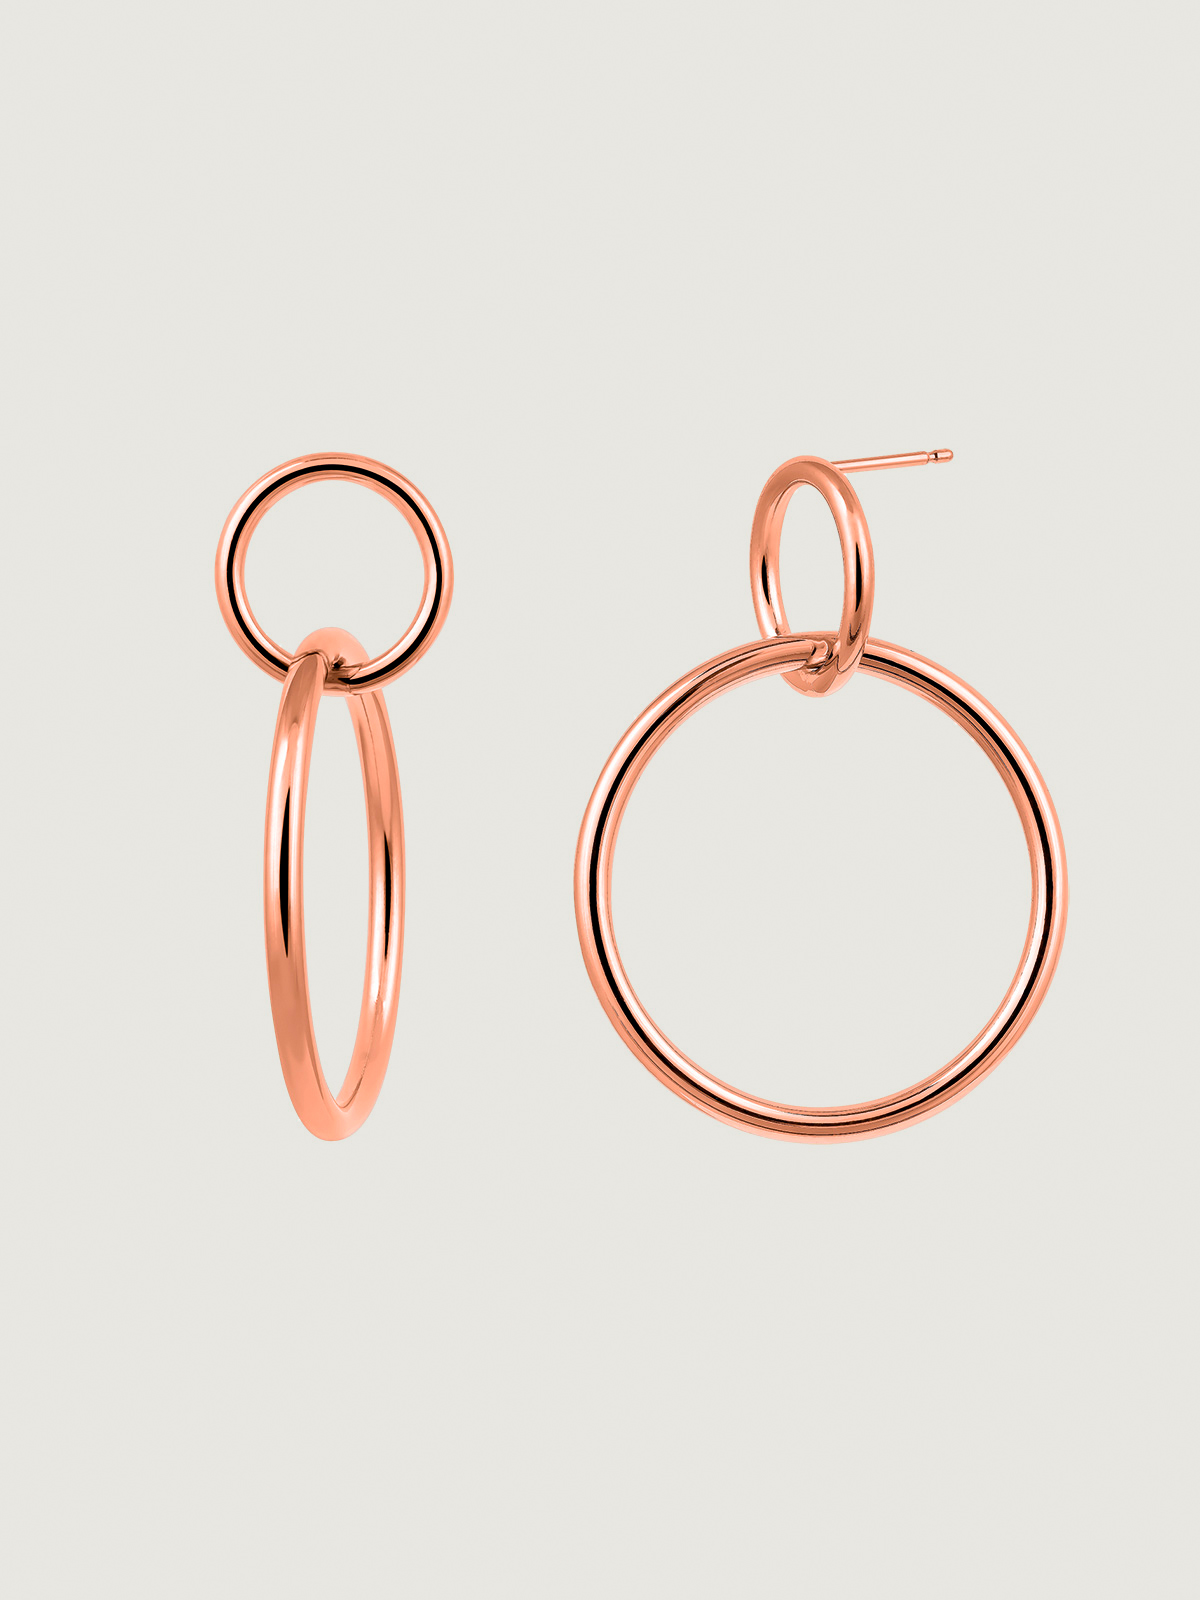 Double hoop earrings made of 925 silver bathed in 18K rose gold